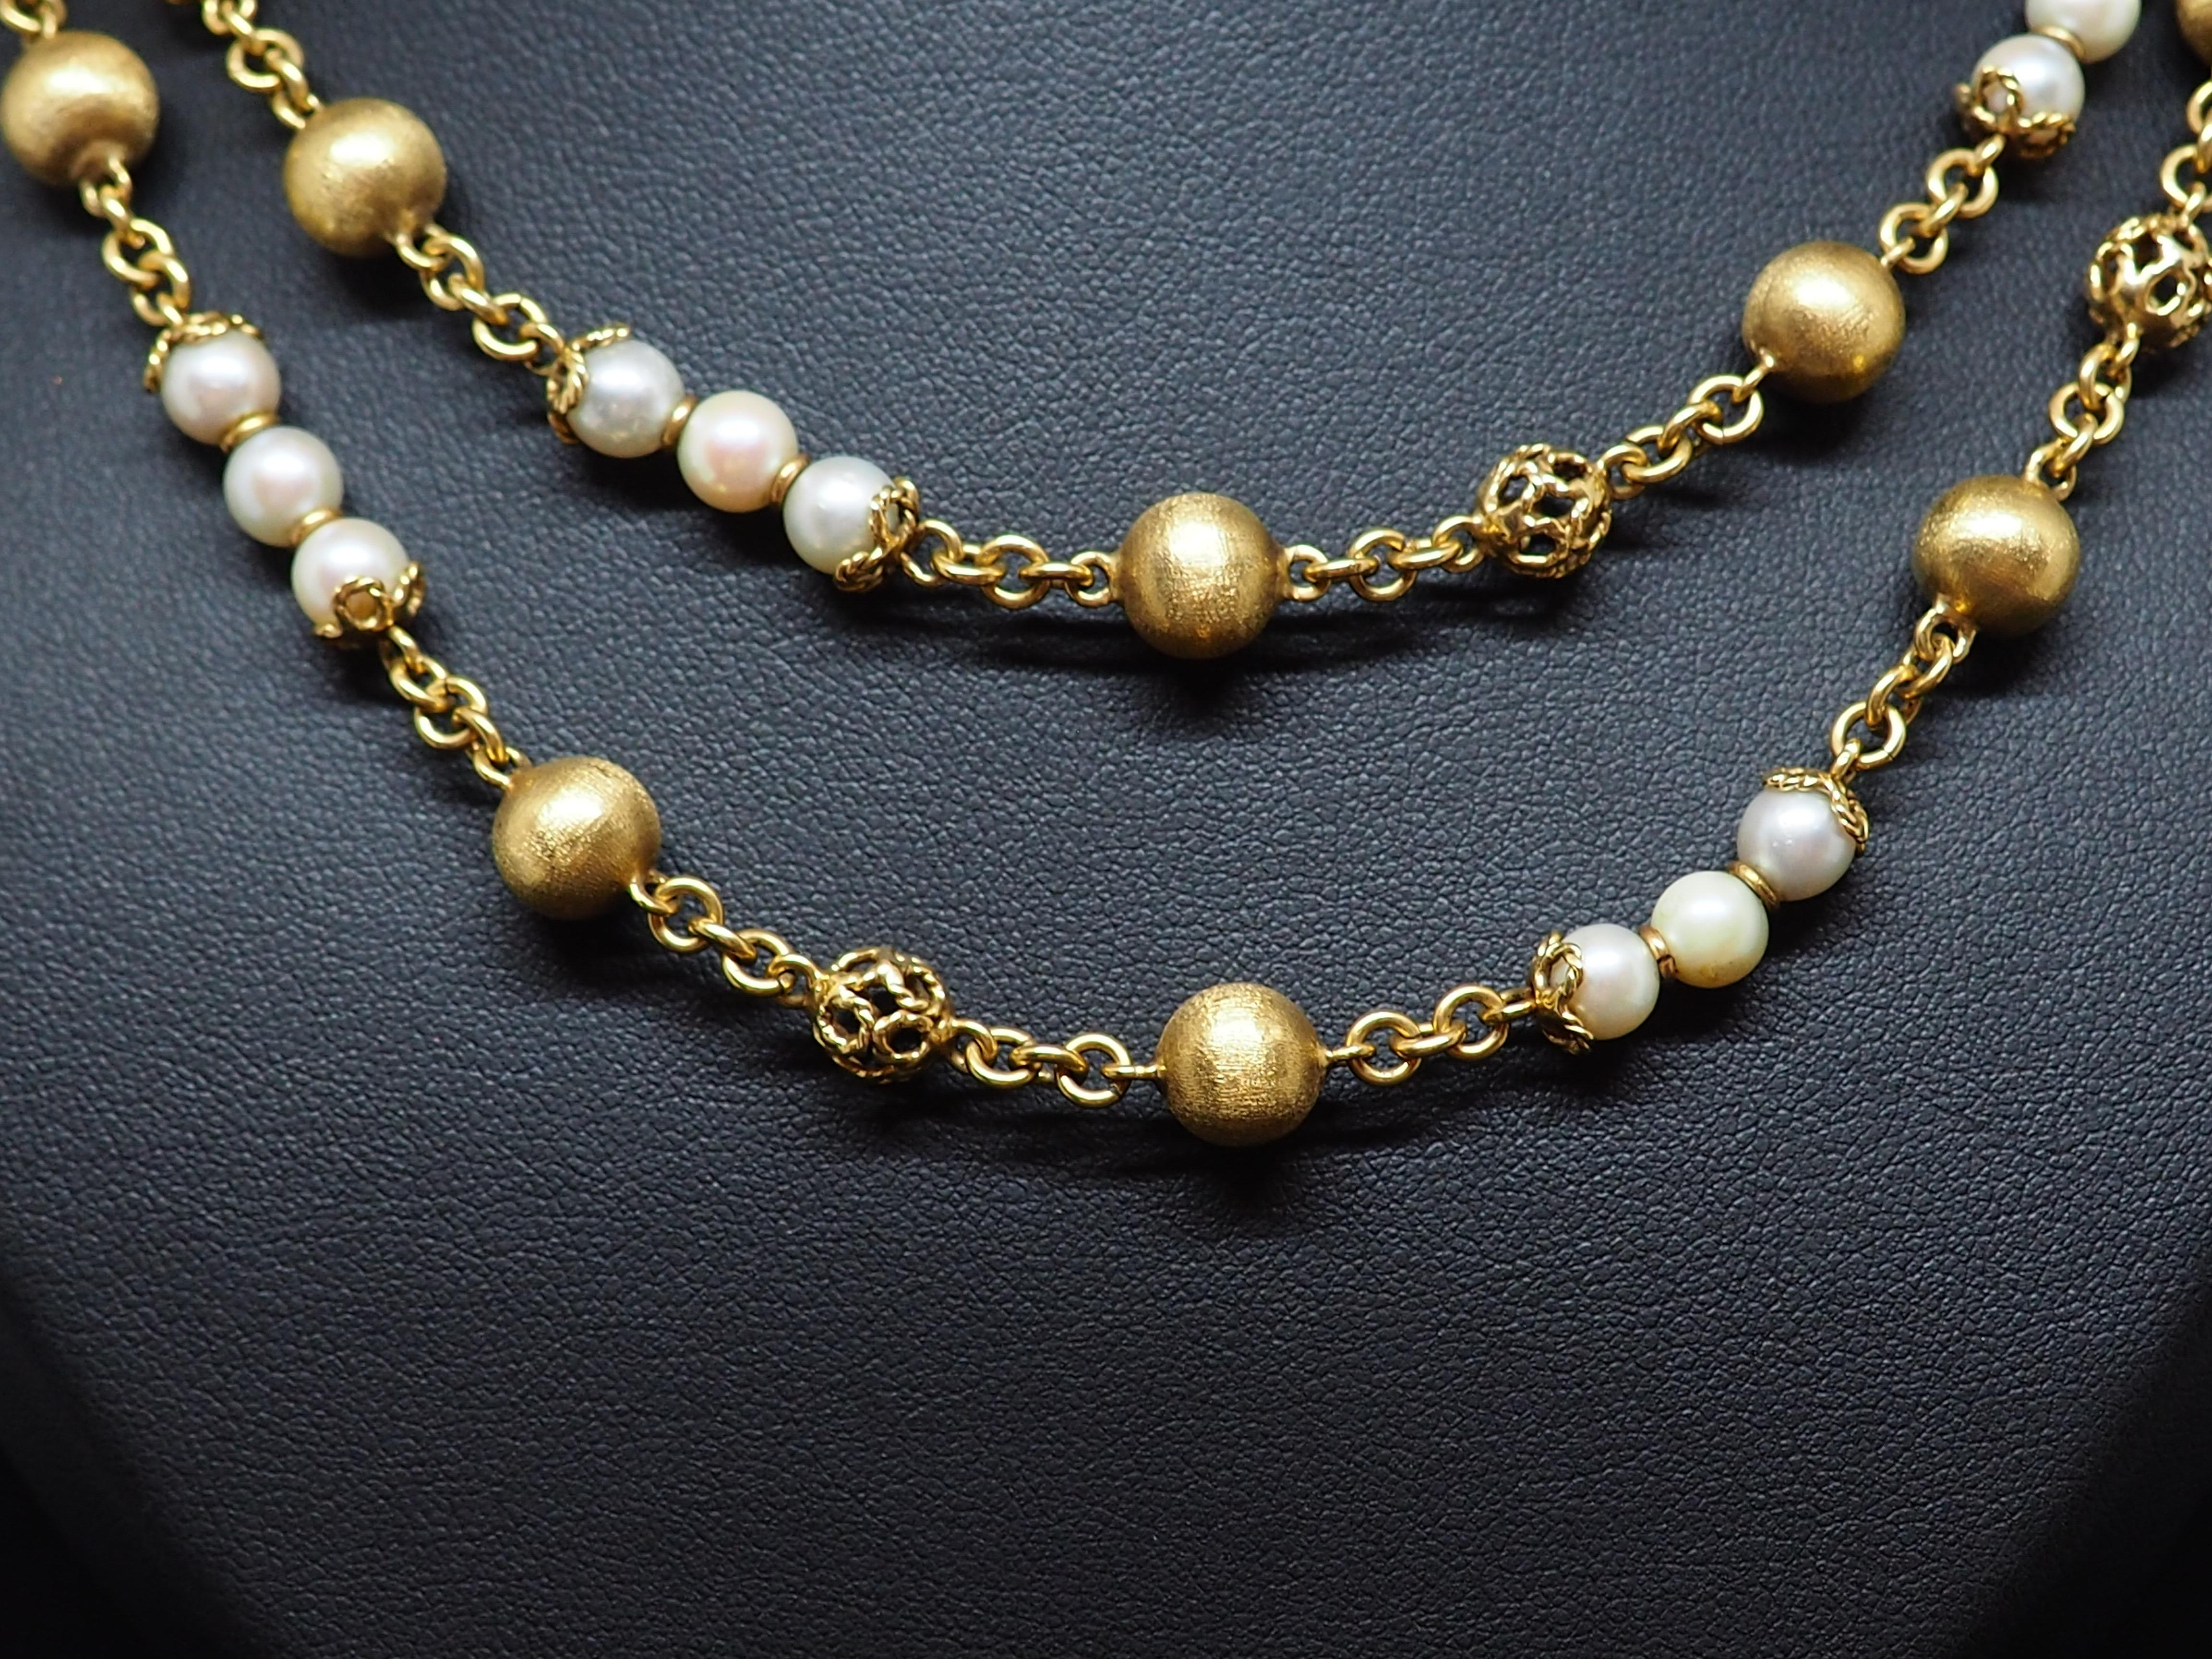 Round Cut Elegant Beaded Necklace in 18K Yellow Gold, Adorned with 39 Handpicked Pearls For Sale